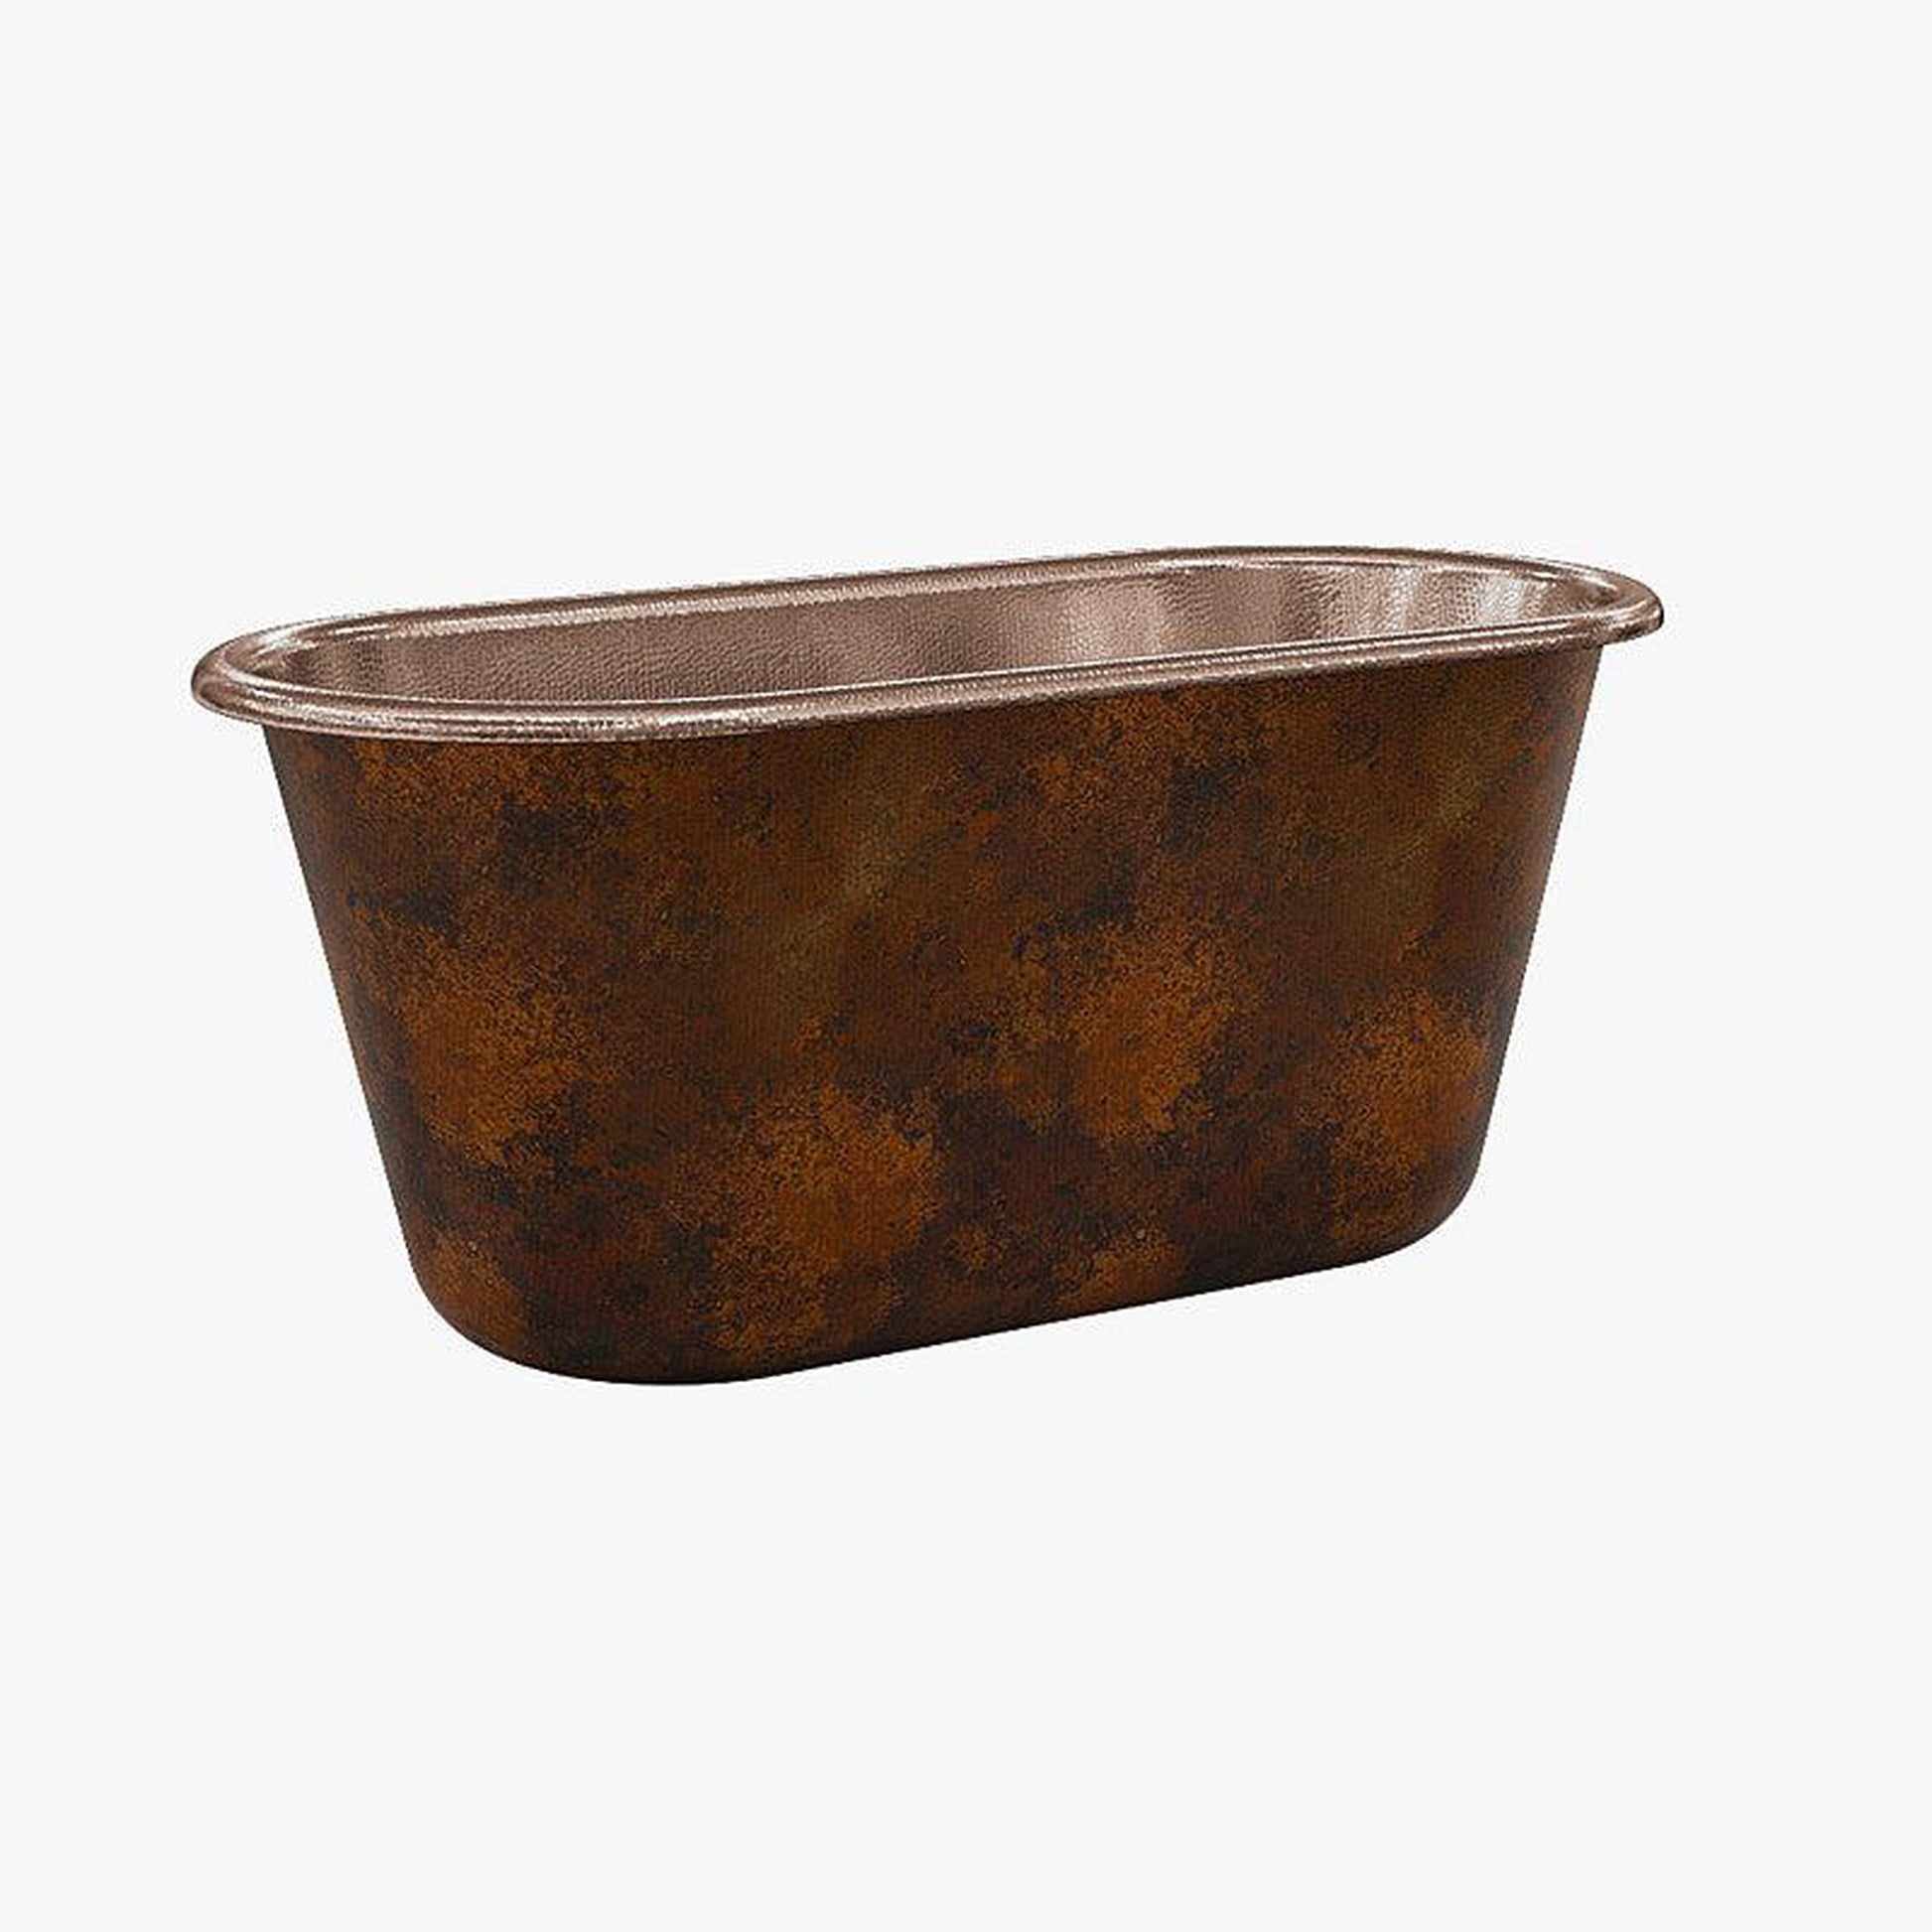 CopperSmith Heritage HX1 64" x 31" x 31" 14-Gauge Fire Copper Freestanding Bathtub With Polished Copper Interior and Brushed Nickel Push Button Tub Drain